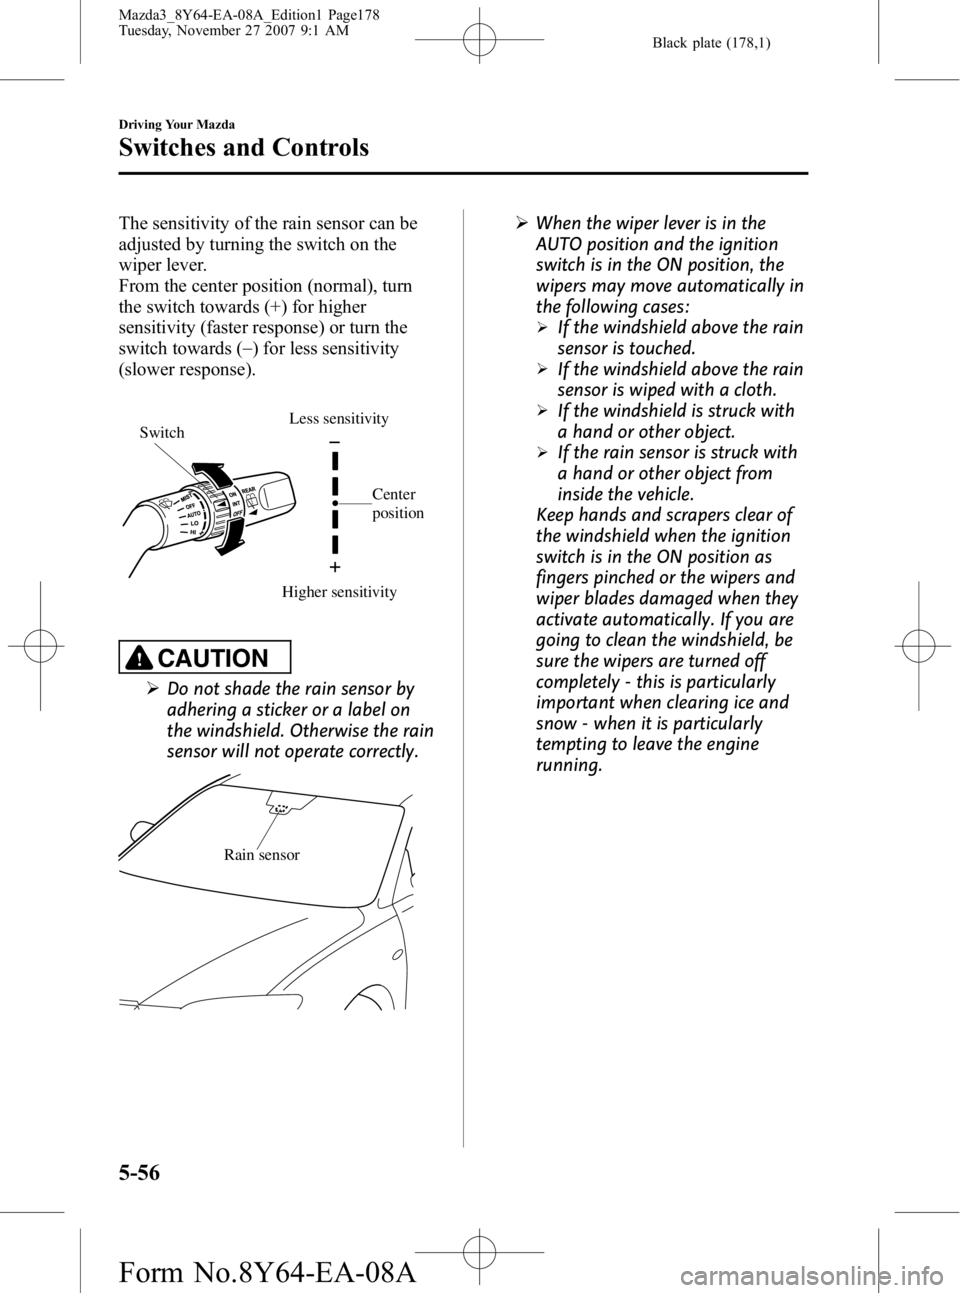 MAZDA MODEL 3 5-DOOR 2008  Owners Manual Black plate (178,1)
The sensitivity of the rain sensor can be
adjusted by turning the switch on the
wiper lever.
From the center position (normal), turn
the switch towards (+) for higher
sensitivity (